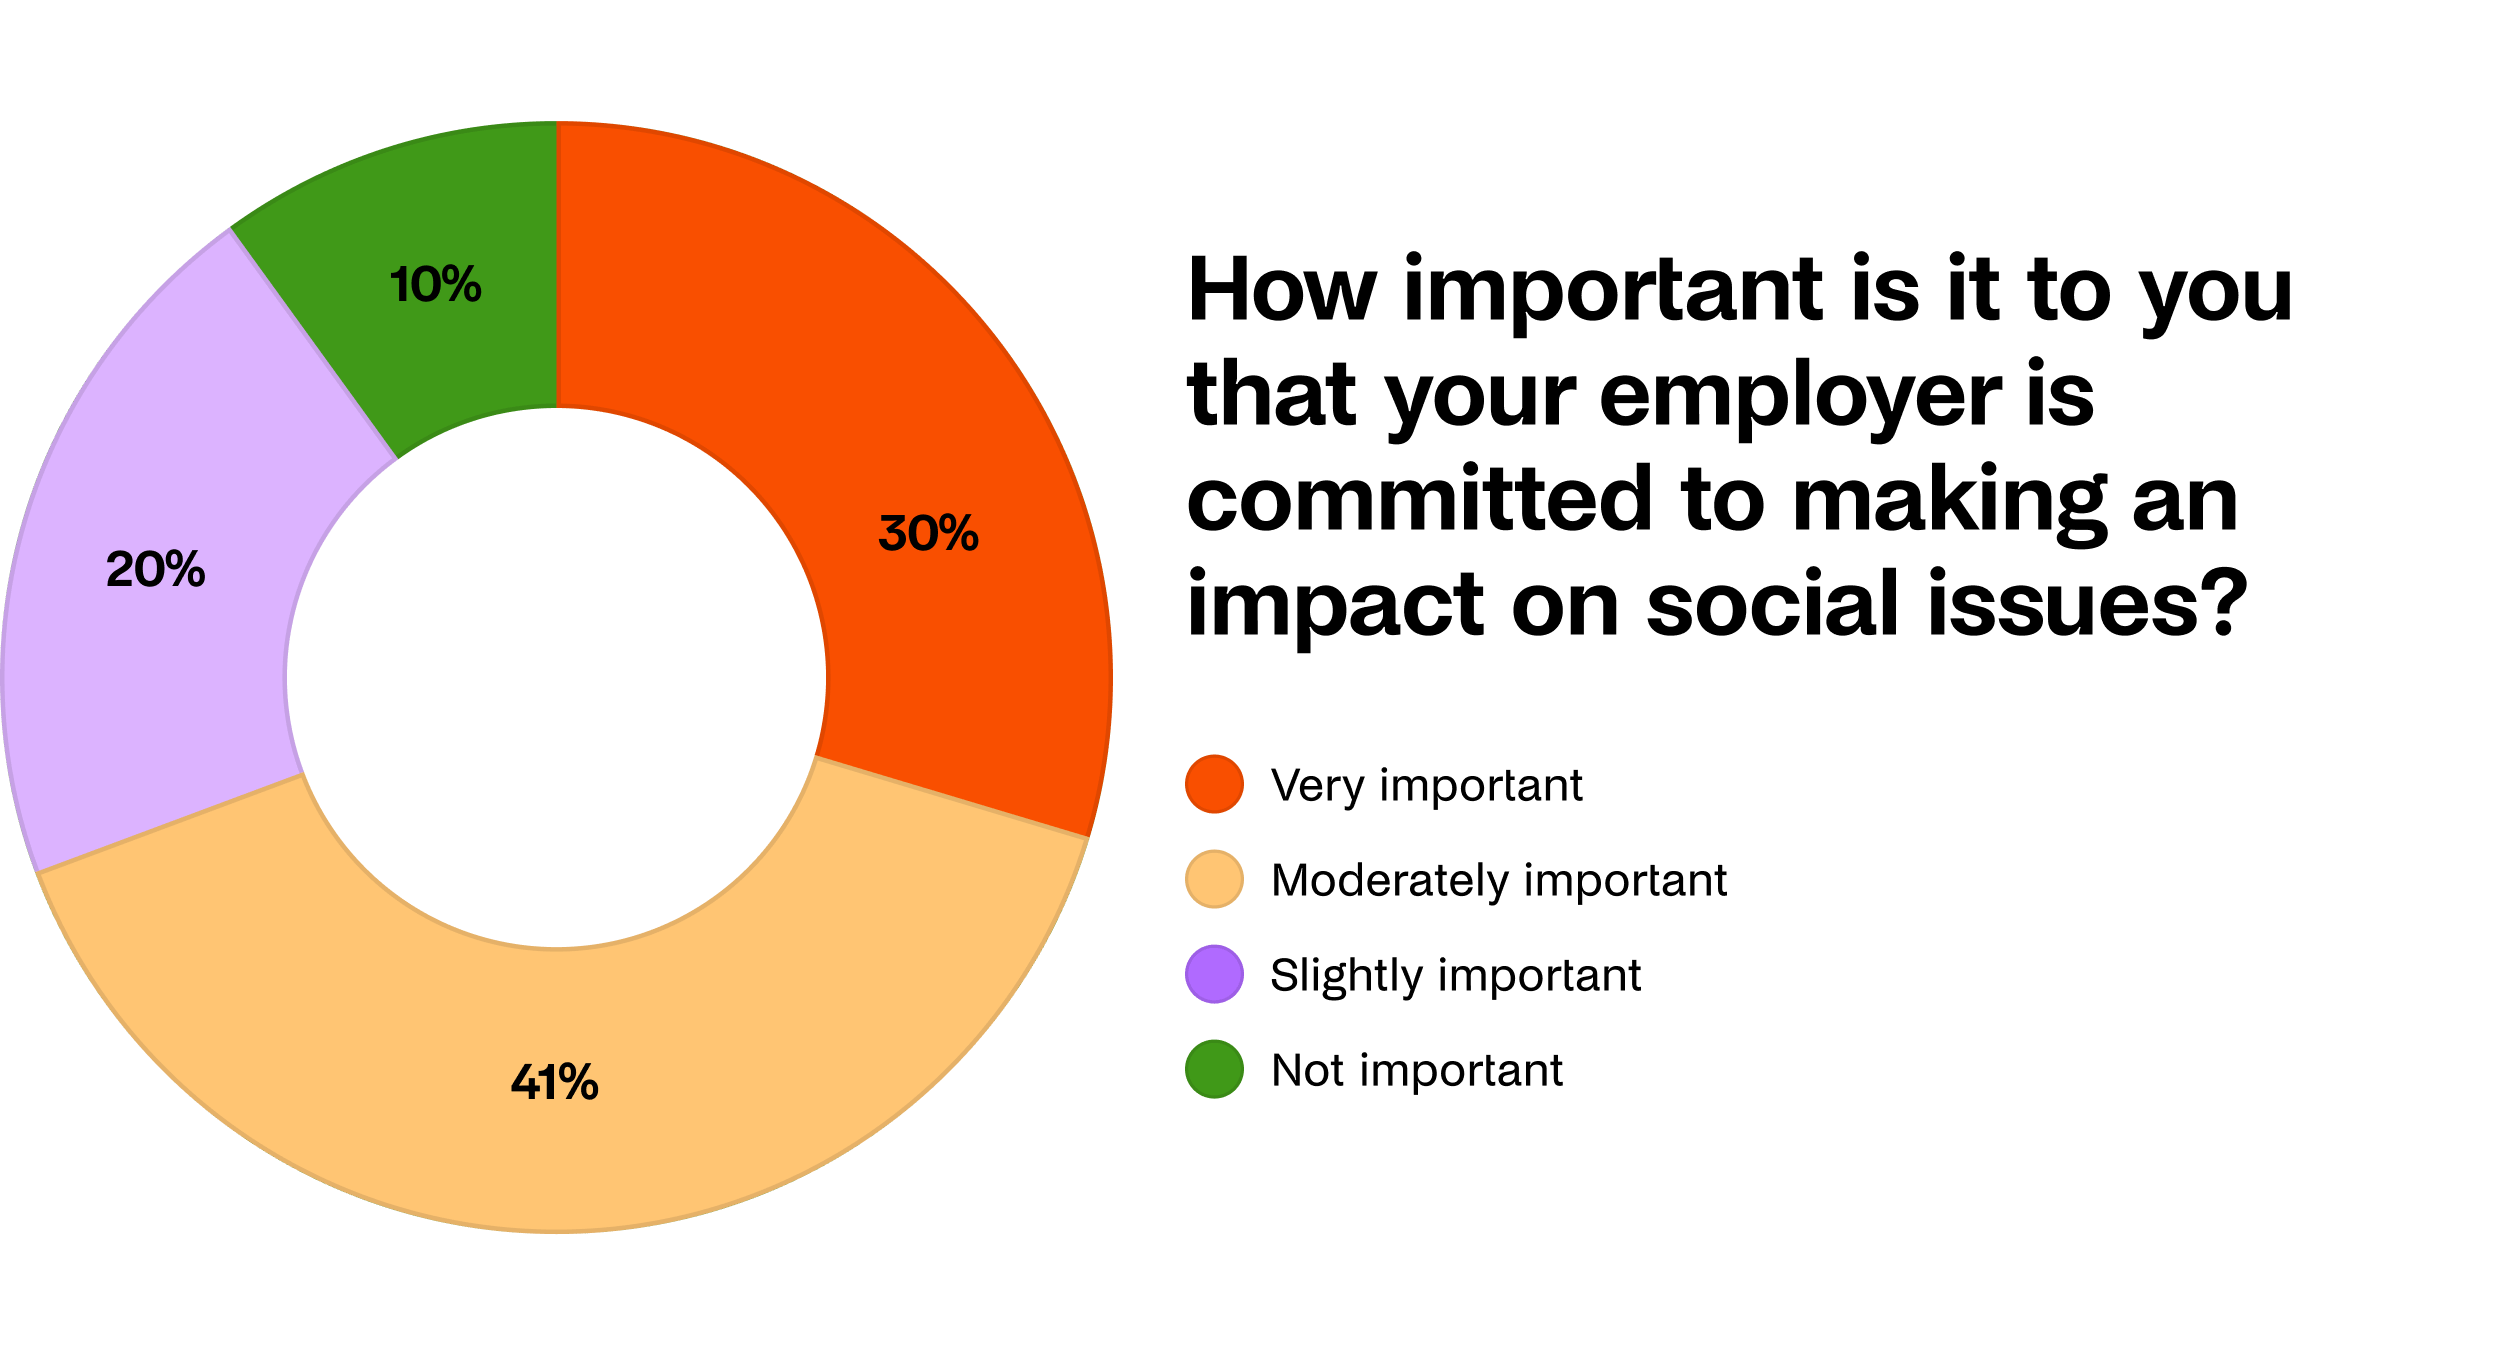 Chart: ”How important is it to you that your employer is committed to making an impact on social issues? 41% moderately important, 30% very important, 20% slightly important, 10% not important